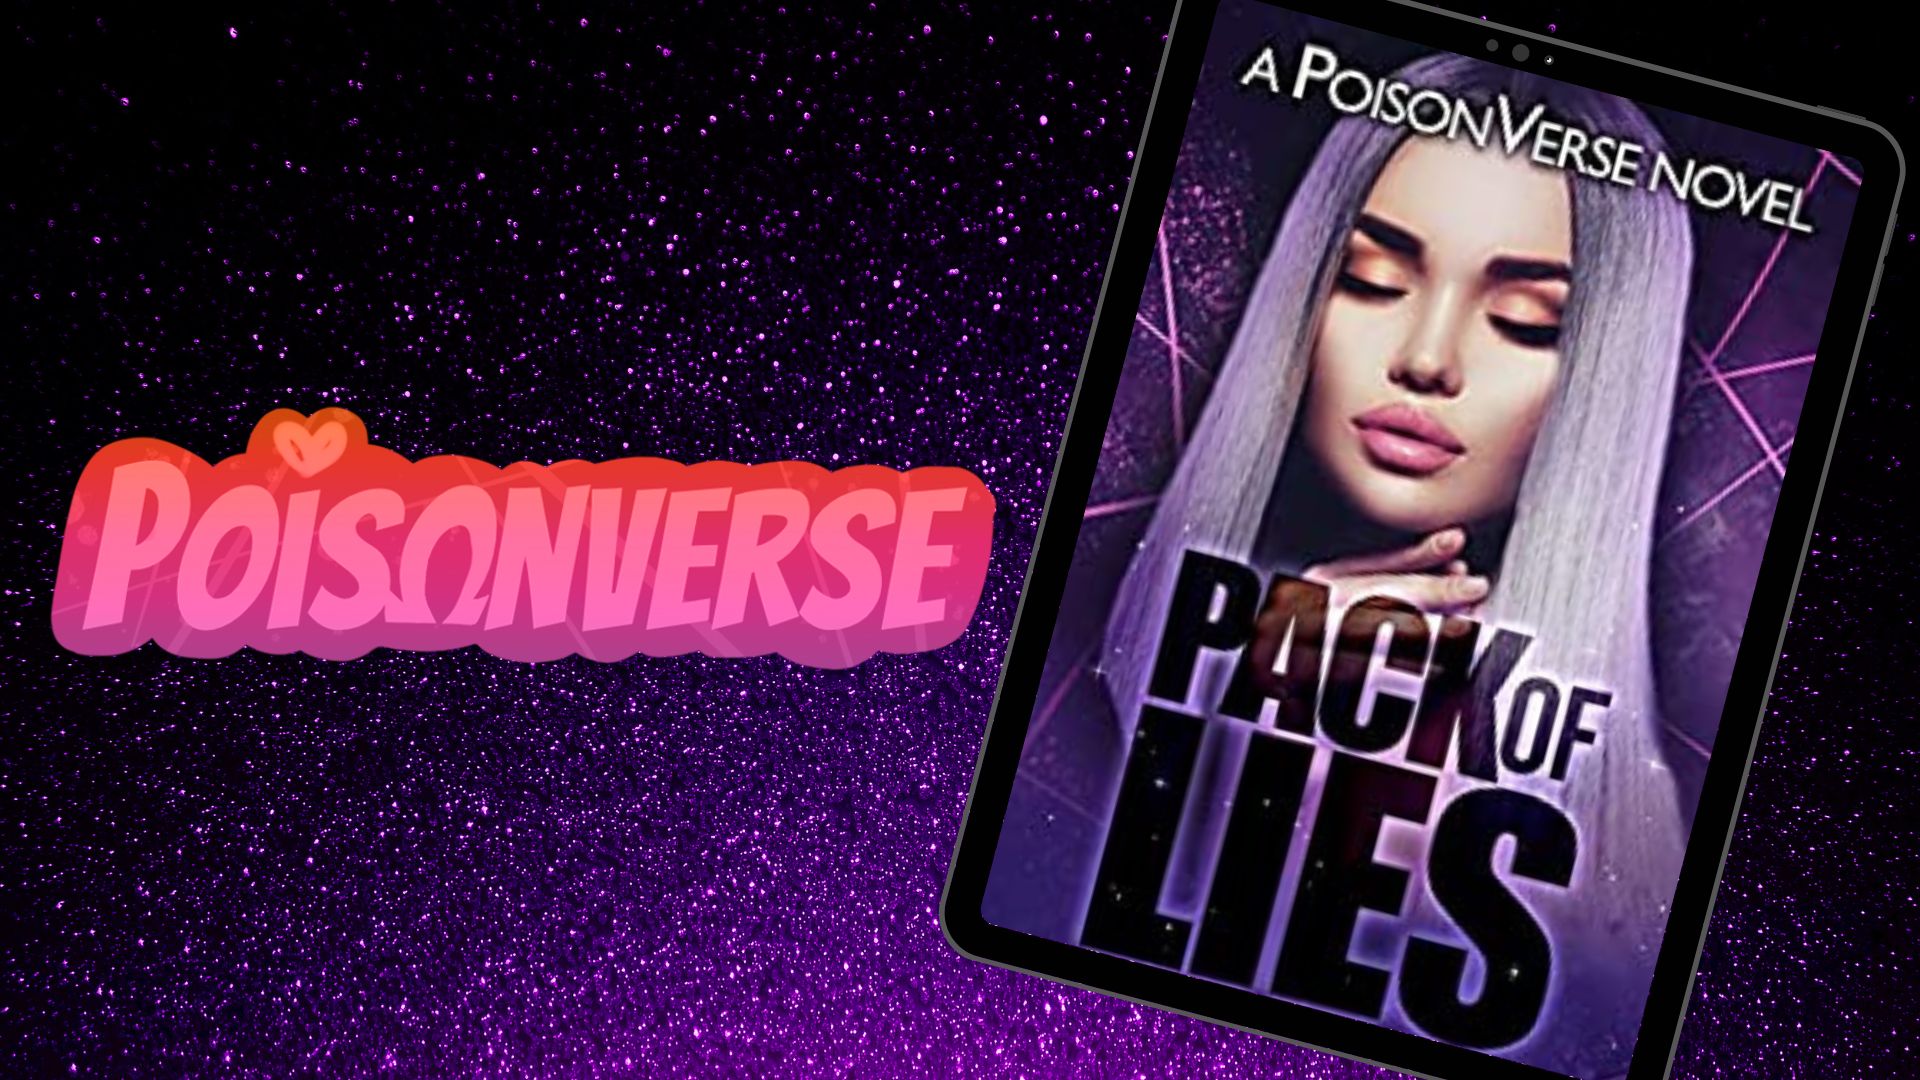 PoisonVerse - Pack of Lies